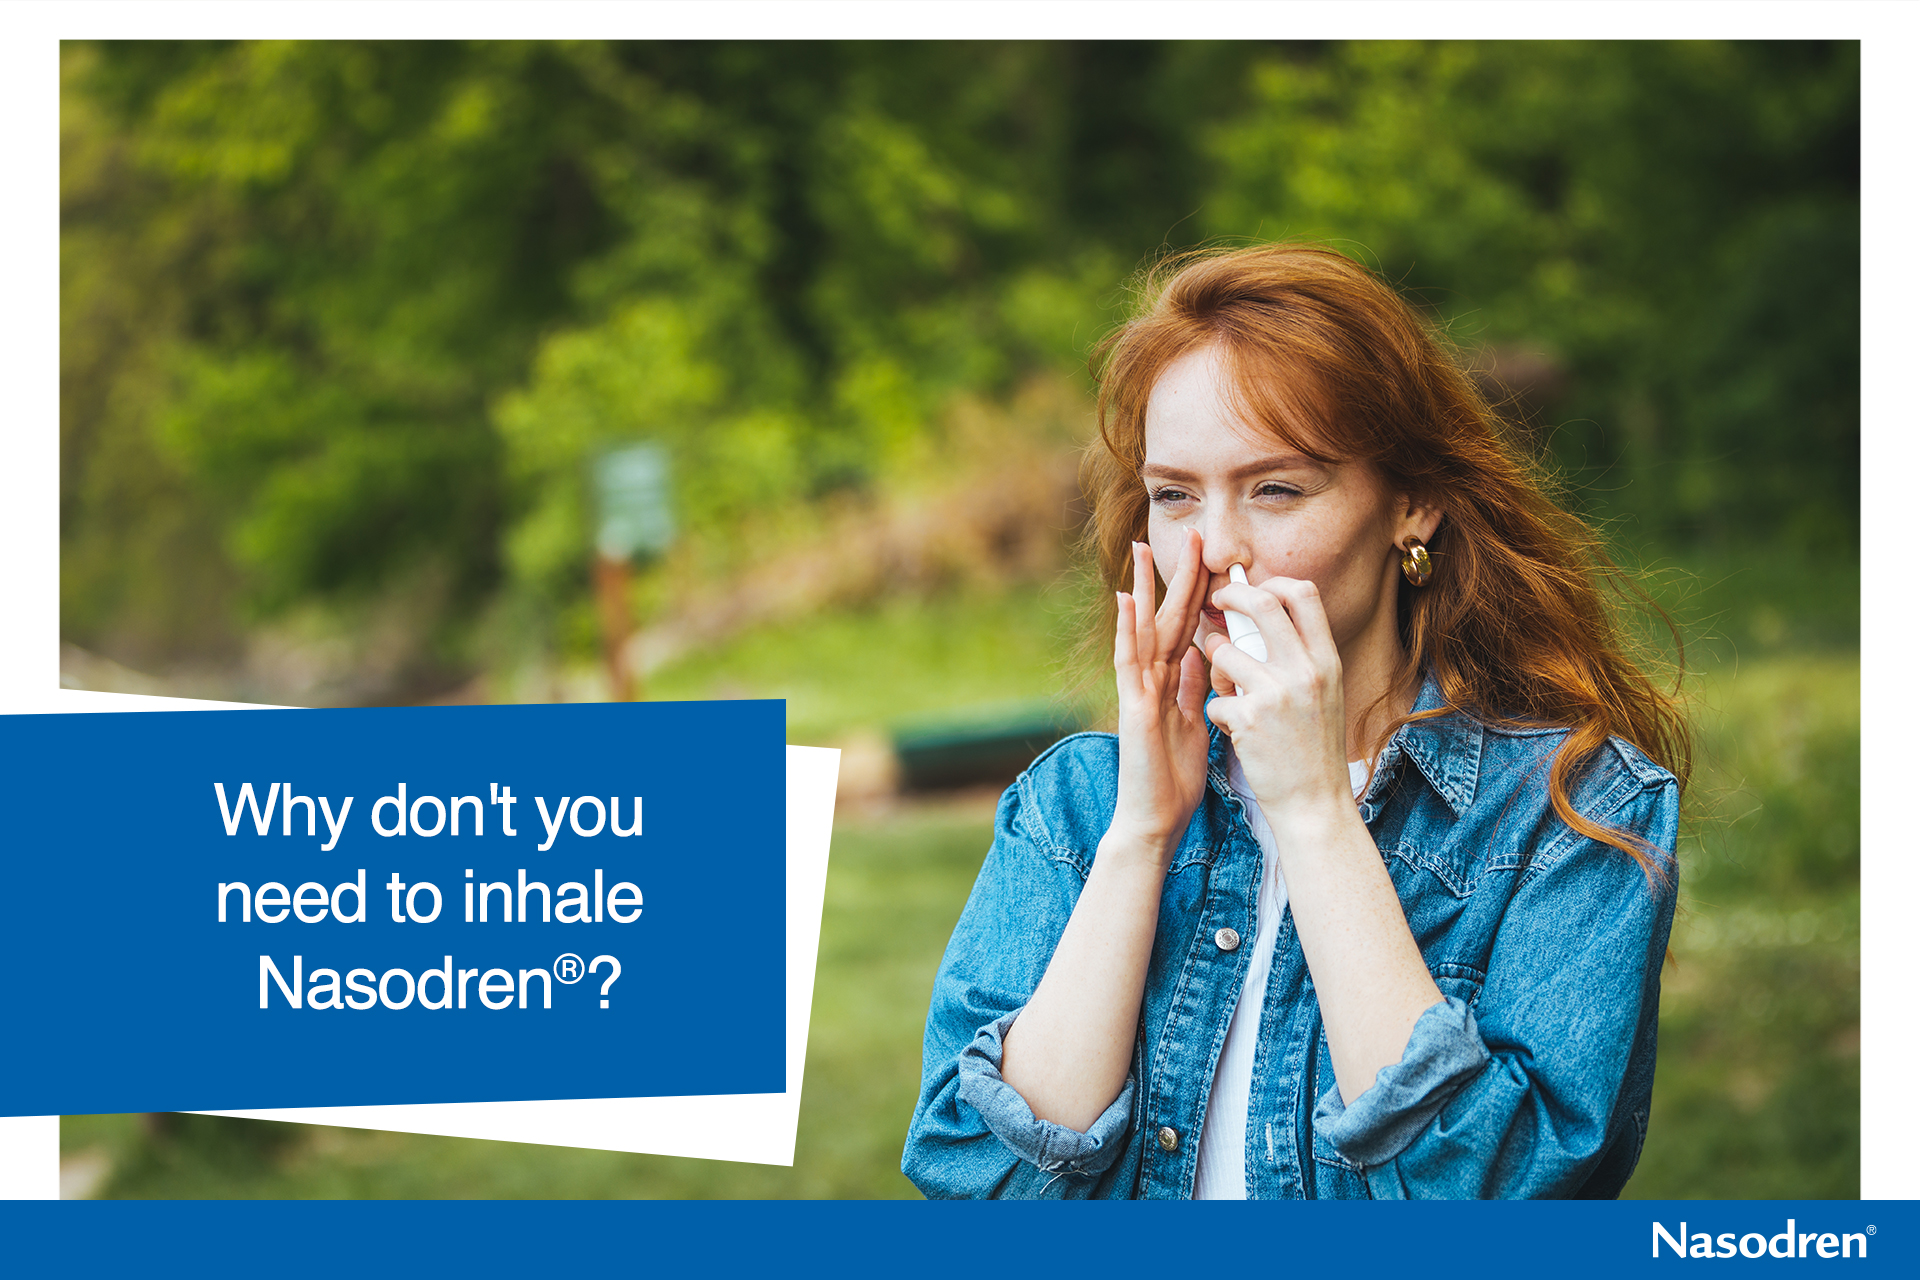 Why don't you need to inhale Nasodren®?